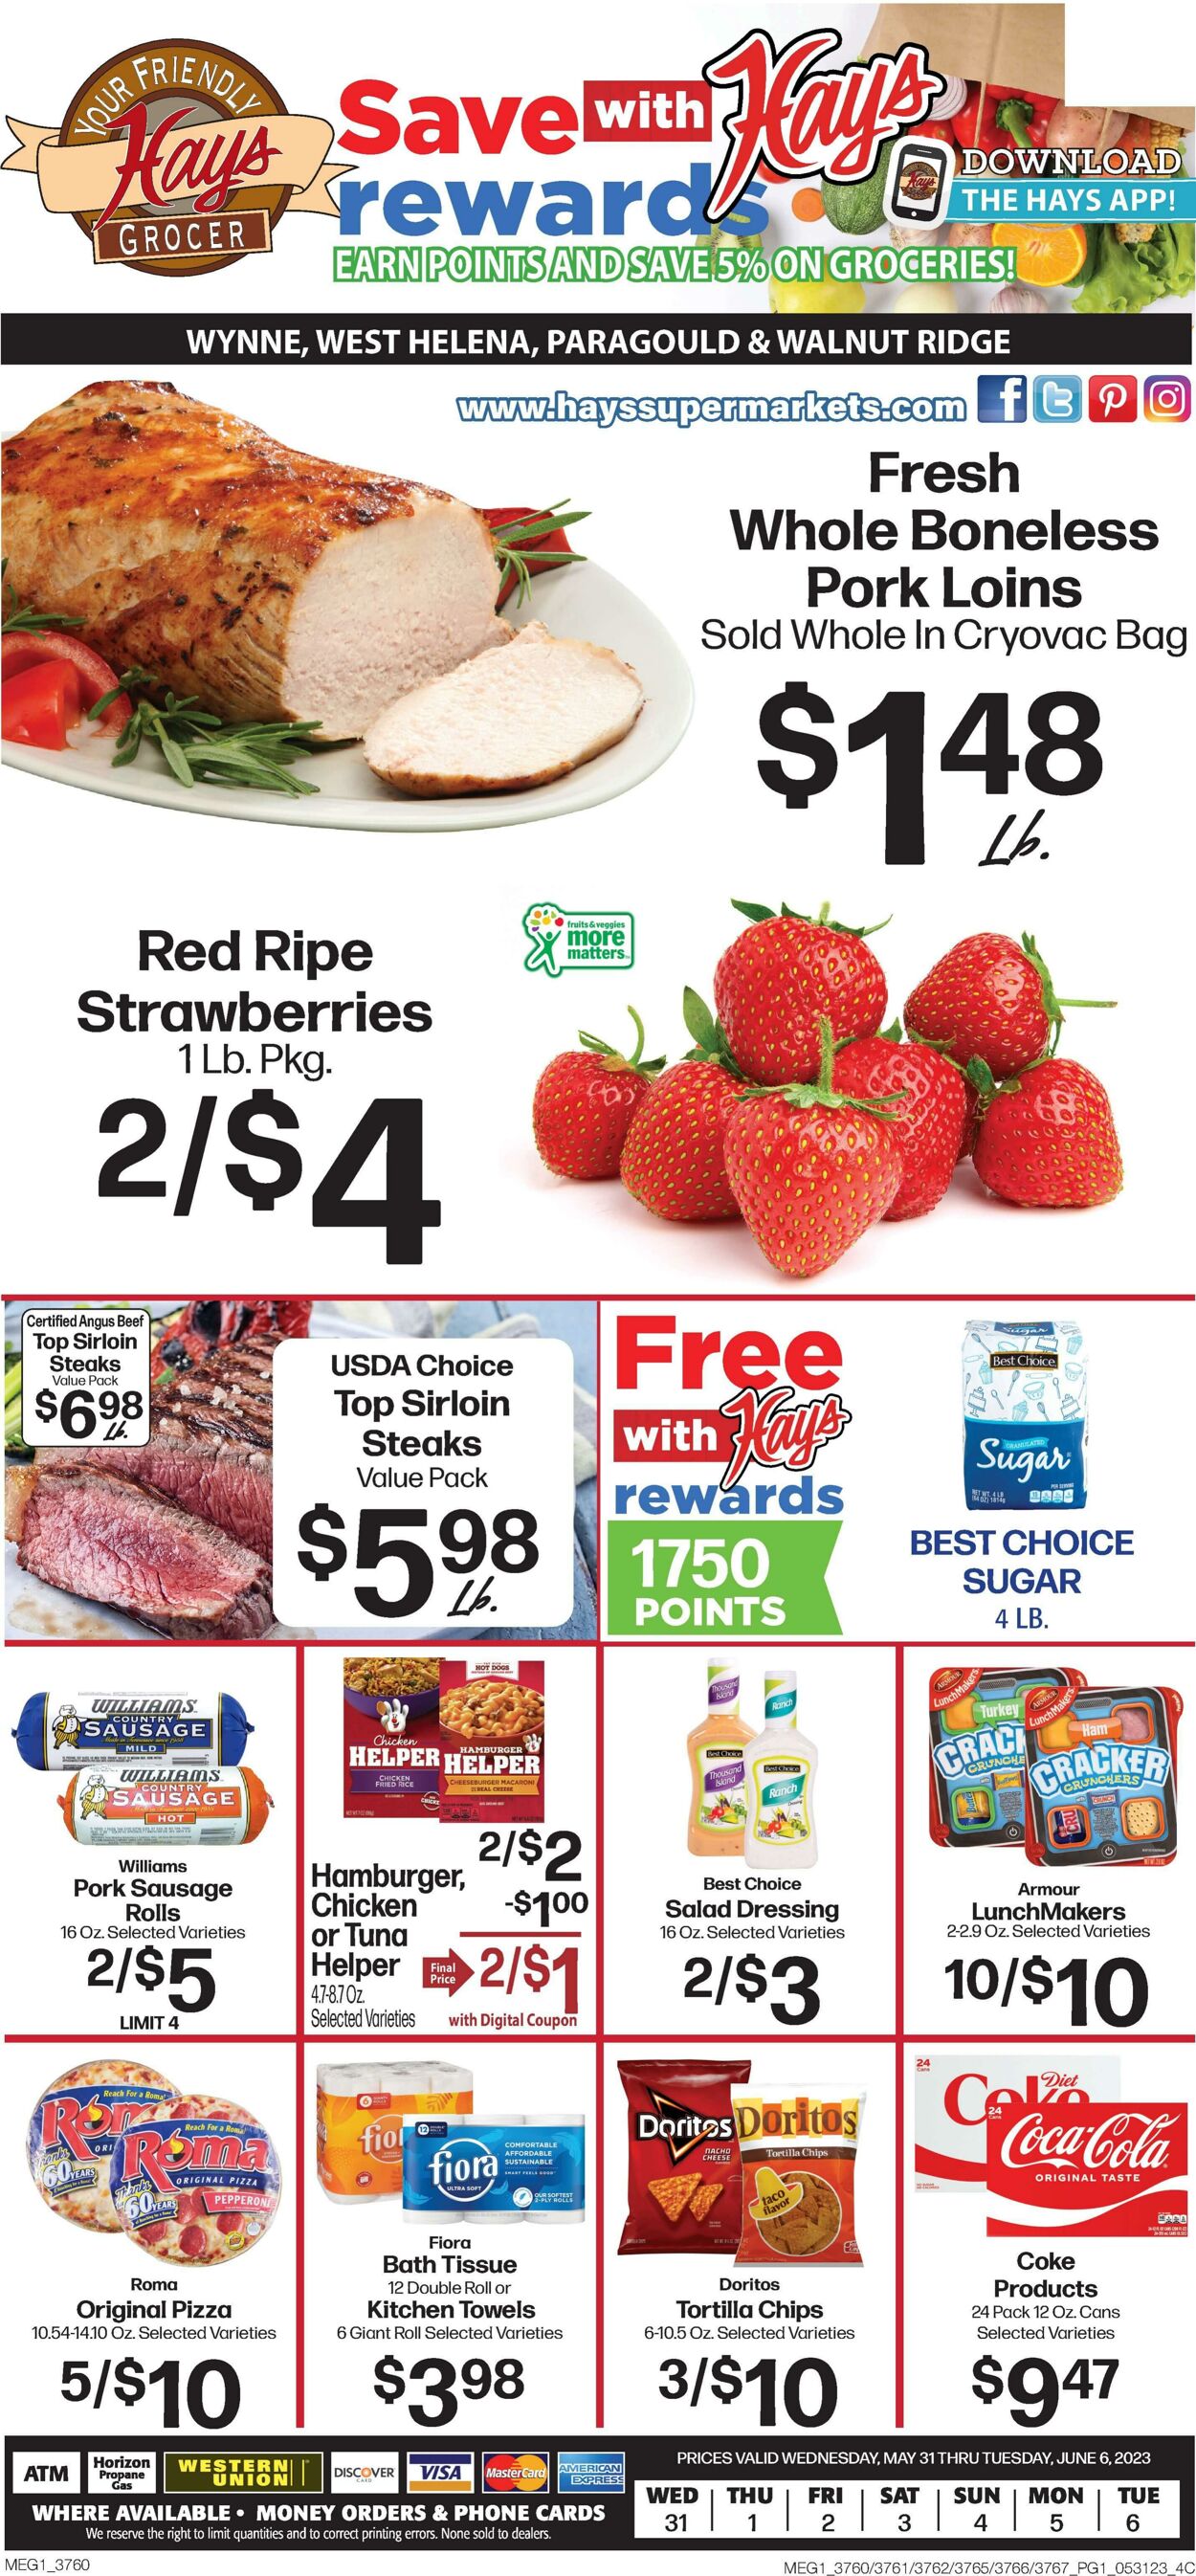 Hays Supermarkets Promotional weekly ads